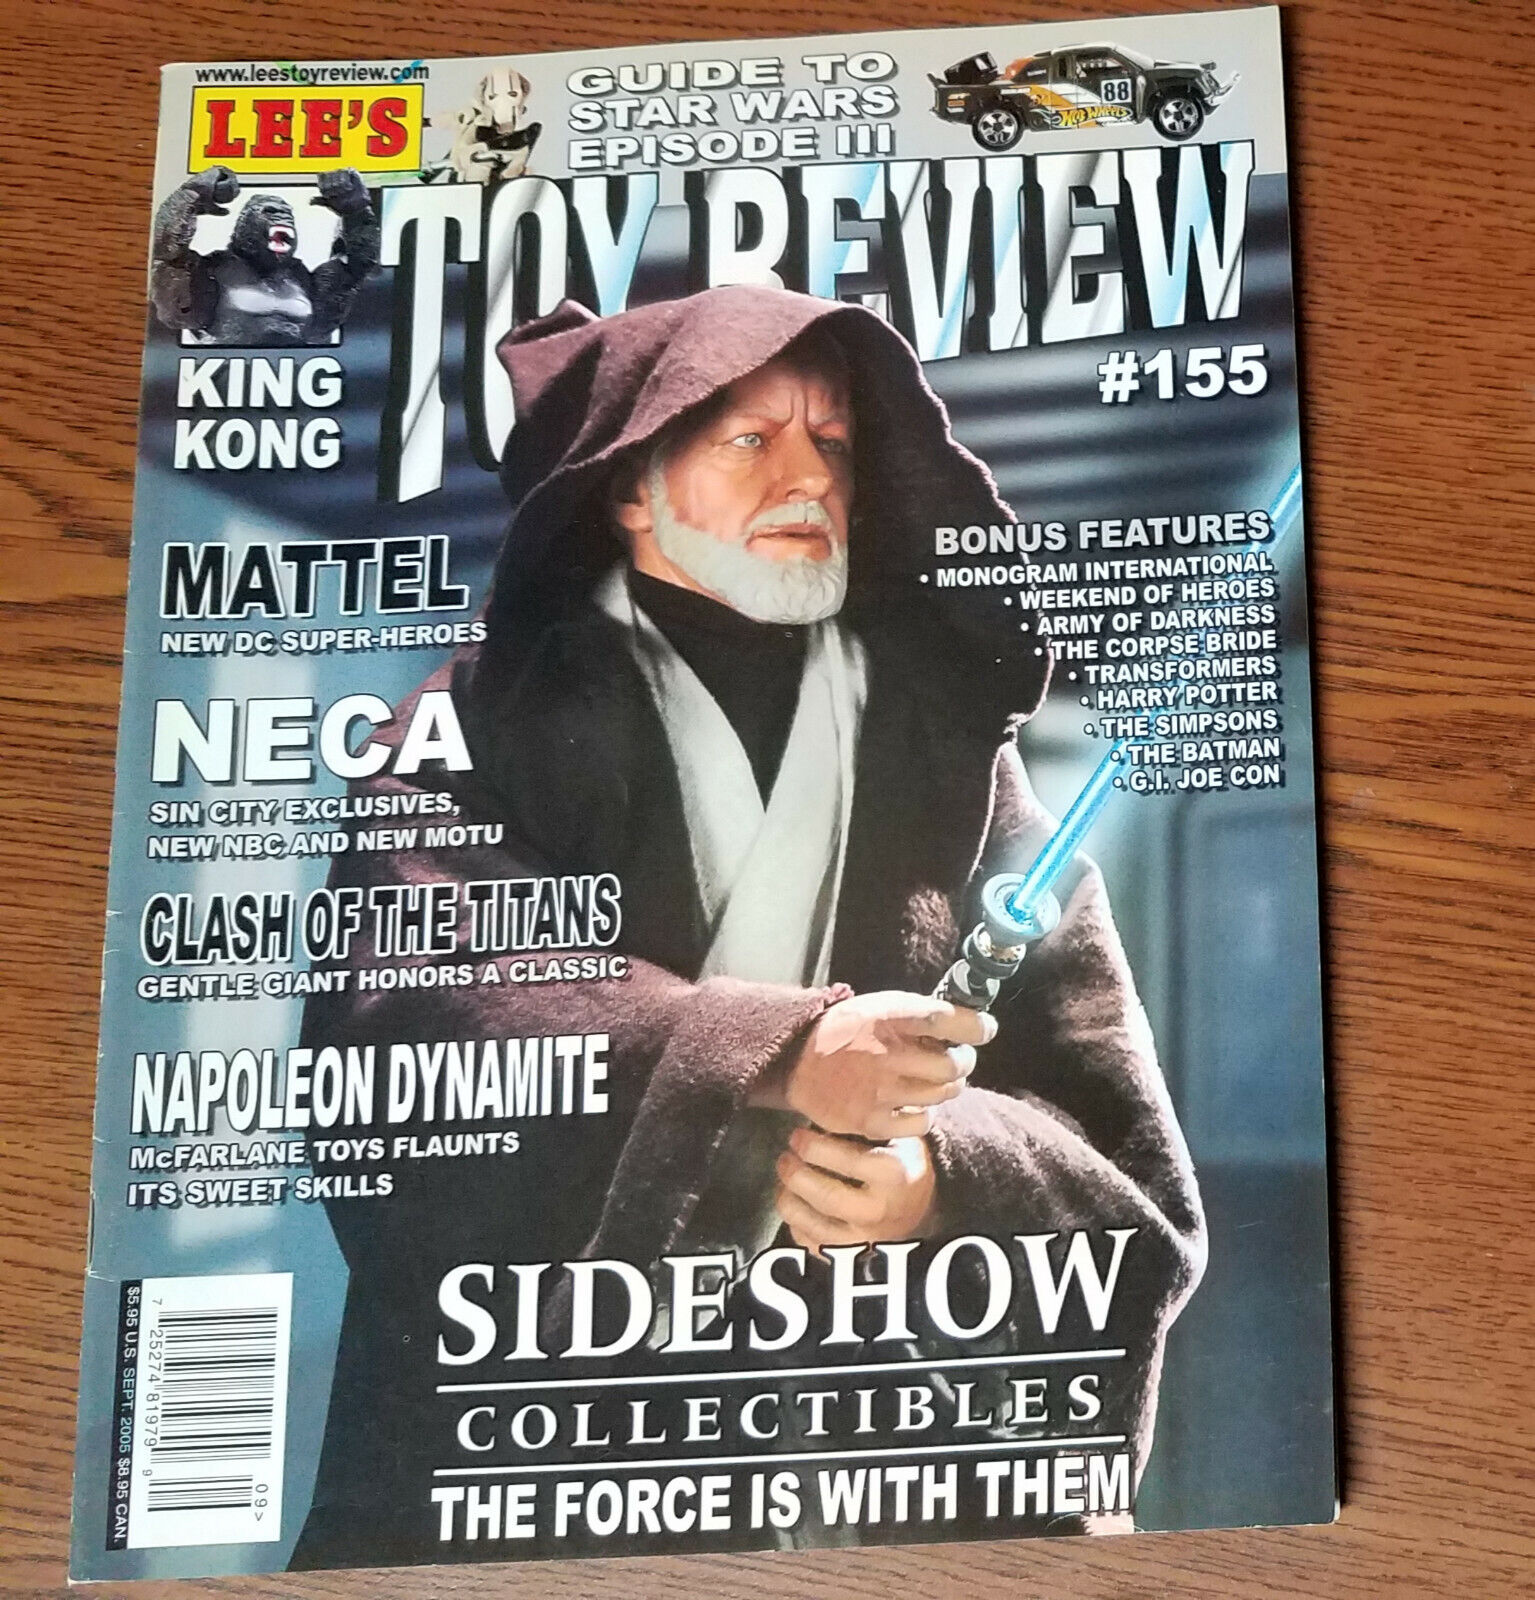 Lee\'s TOY REVIEW Magazine #155 Sept, 2005 Guide to Star Wars ep III